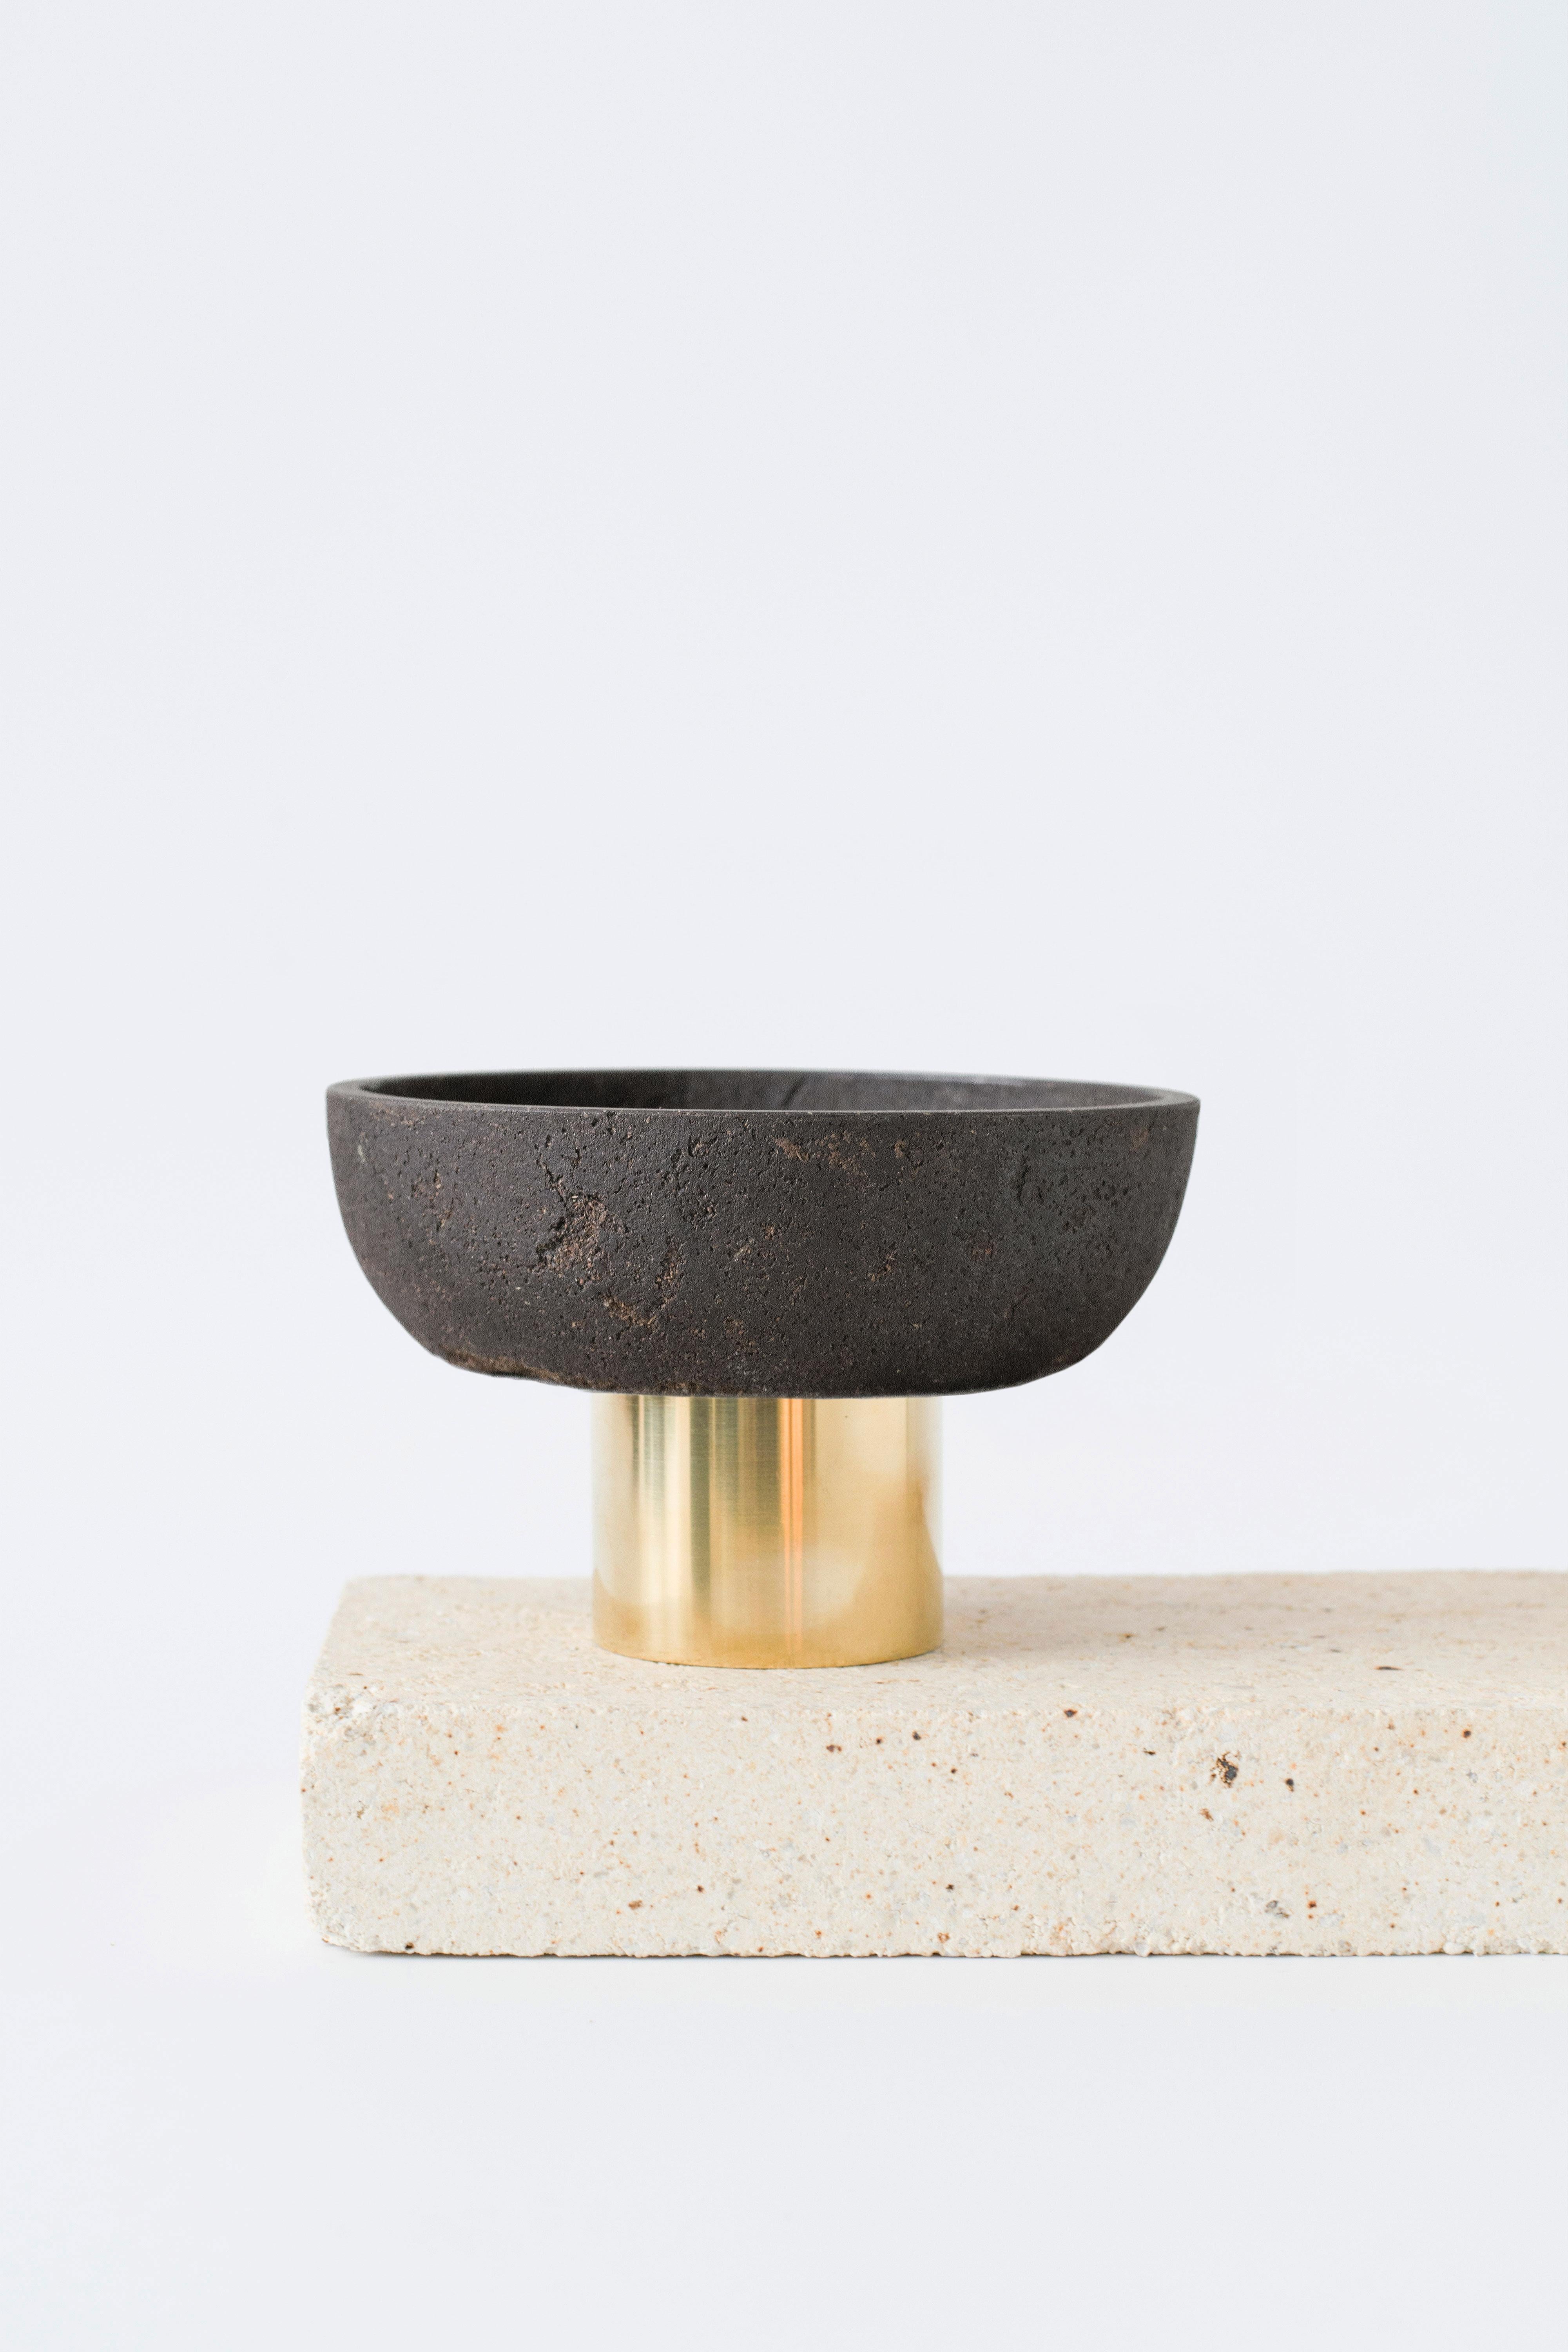 Oak pedestal bowl by Evelina Kudabaite Studio
Handmade
Materials: oak, brass
Dimensions: H 7.5 x D 12 cm
Colour: dark brown
Notes: for dry use

Since 2015, product designer Evelina Kudabaite keeps on developing and making GIRIA objects.